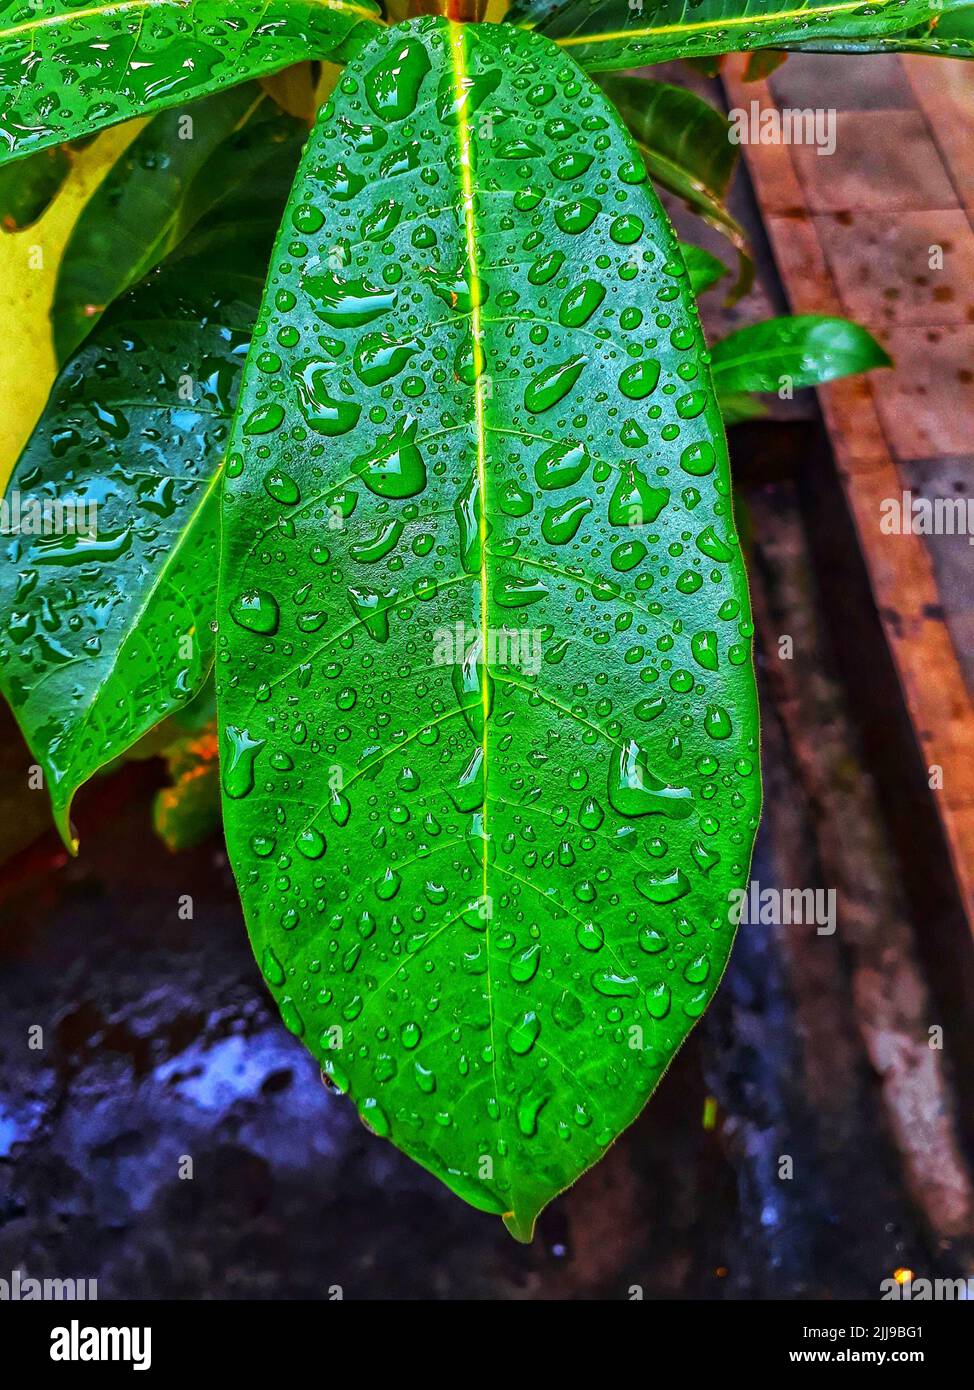 A vertical view of a green leaf with water drops on it Stock Photo